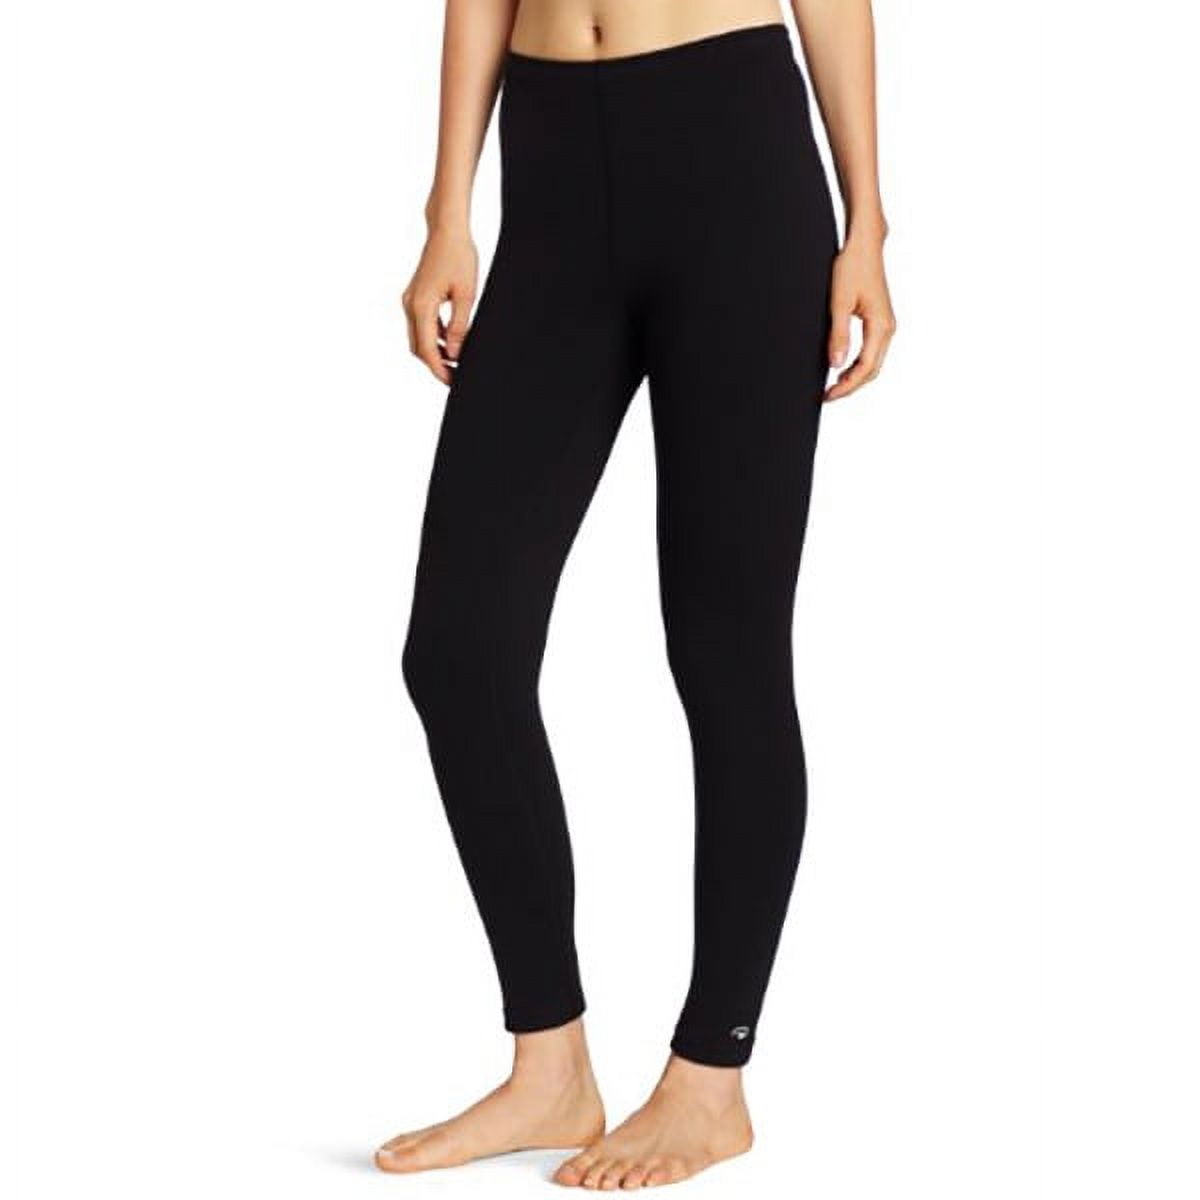 Hanes KEW4 Duofold Varitherm Performance Womens Thermal Pants Size ...